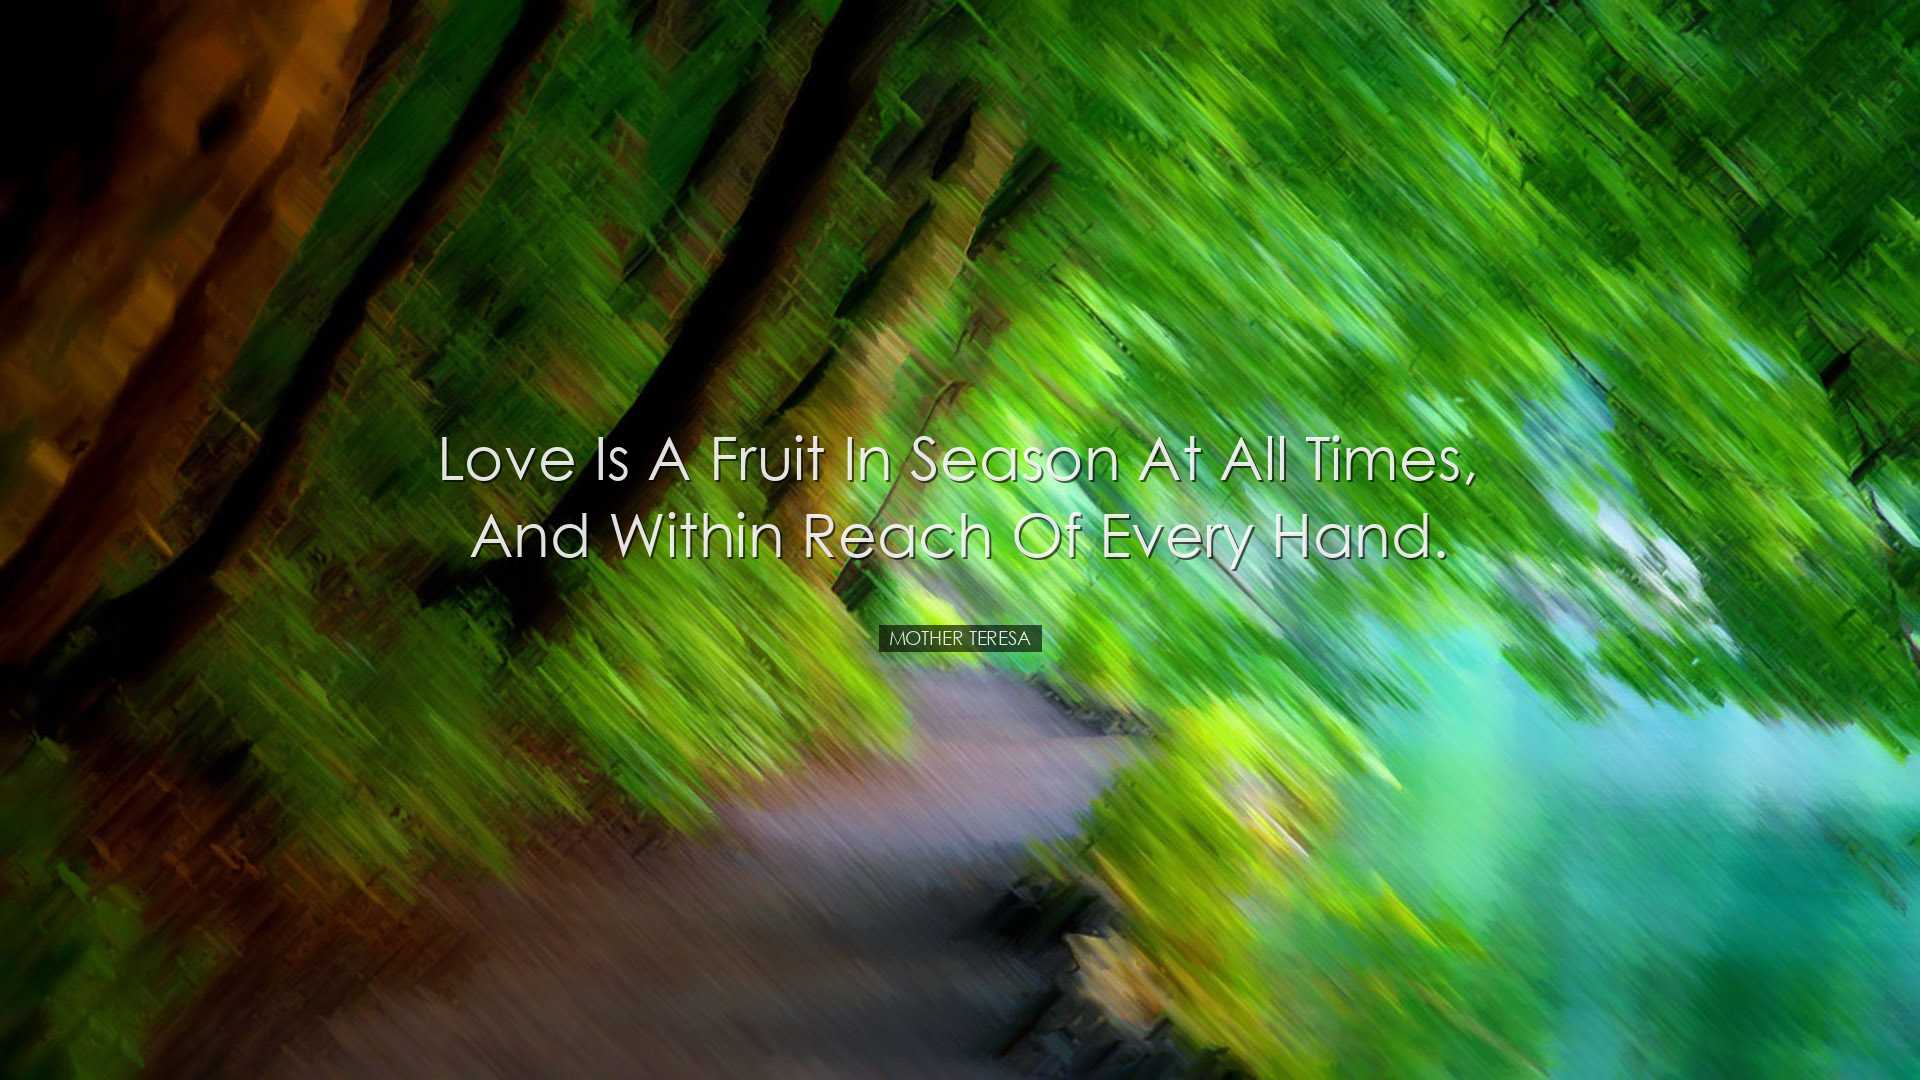 Love is a fruit in season at all times, and within reach of every